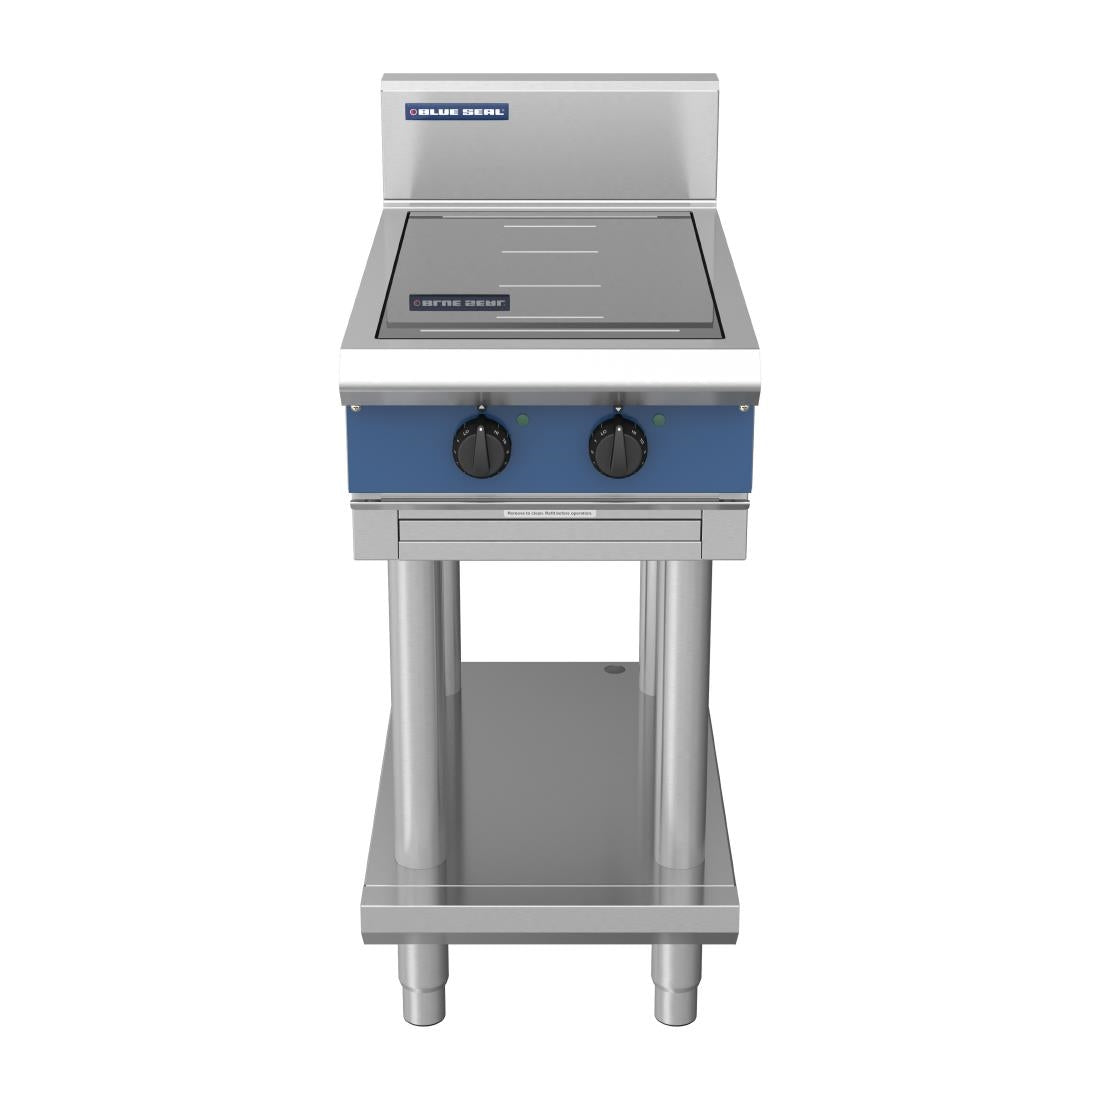 DX754 Blue Seal 2 Zone Free Standing Full Area Induction Hob 10kW IN512F-LS JD Catering Equipment Solutions Ltd